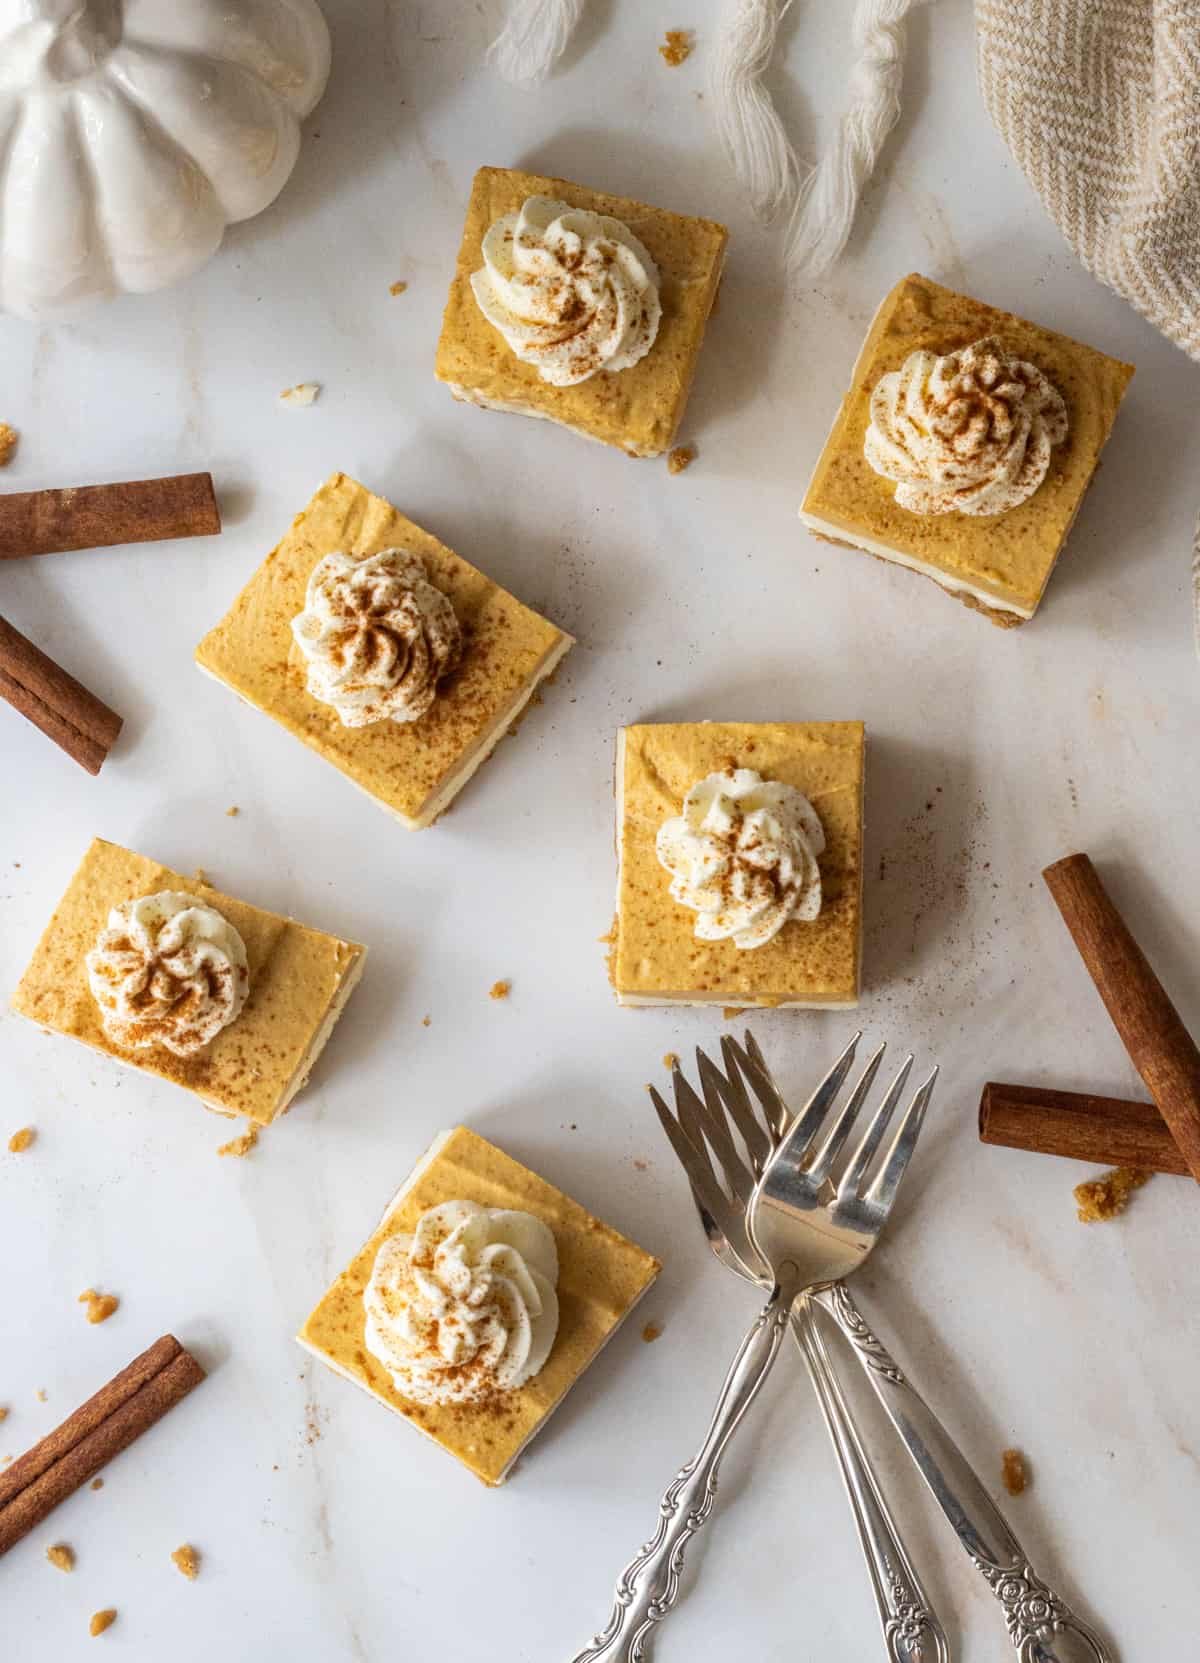 Pumpkin cheesecake bars topped with whipped cream and cinnamon next to cinnamon sticks, forks, and a ceramic pumpkin.